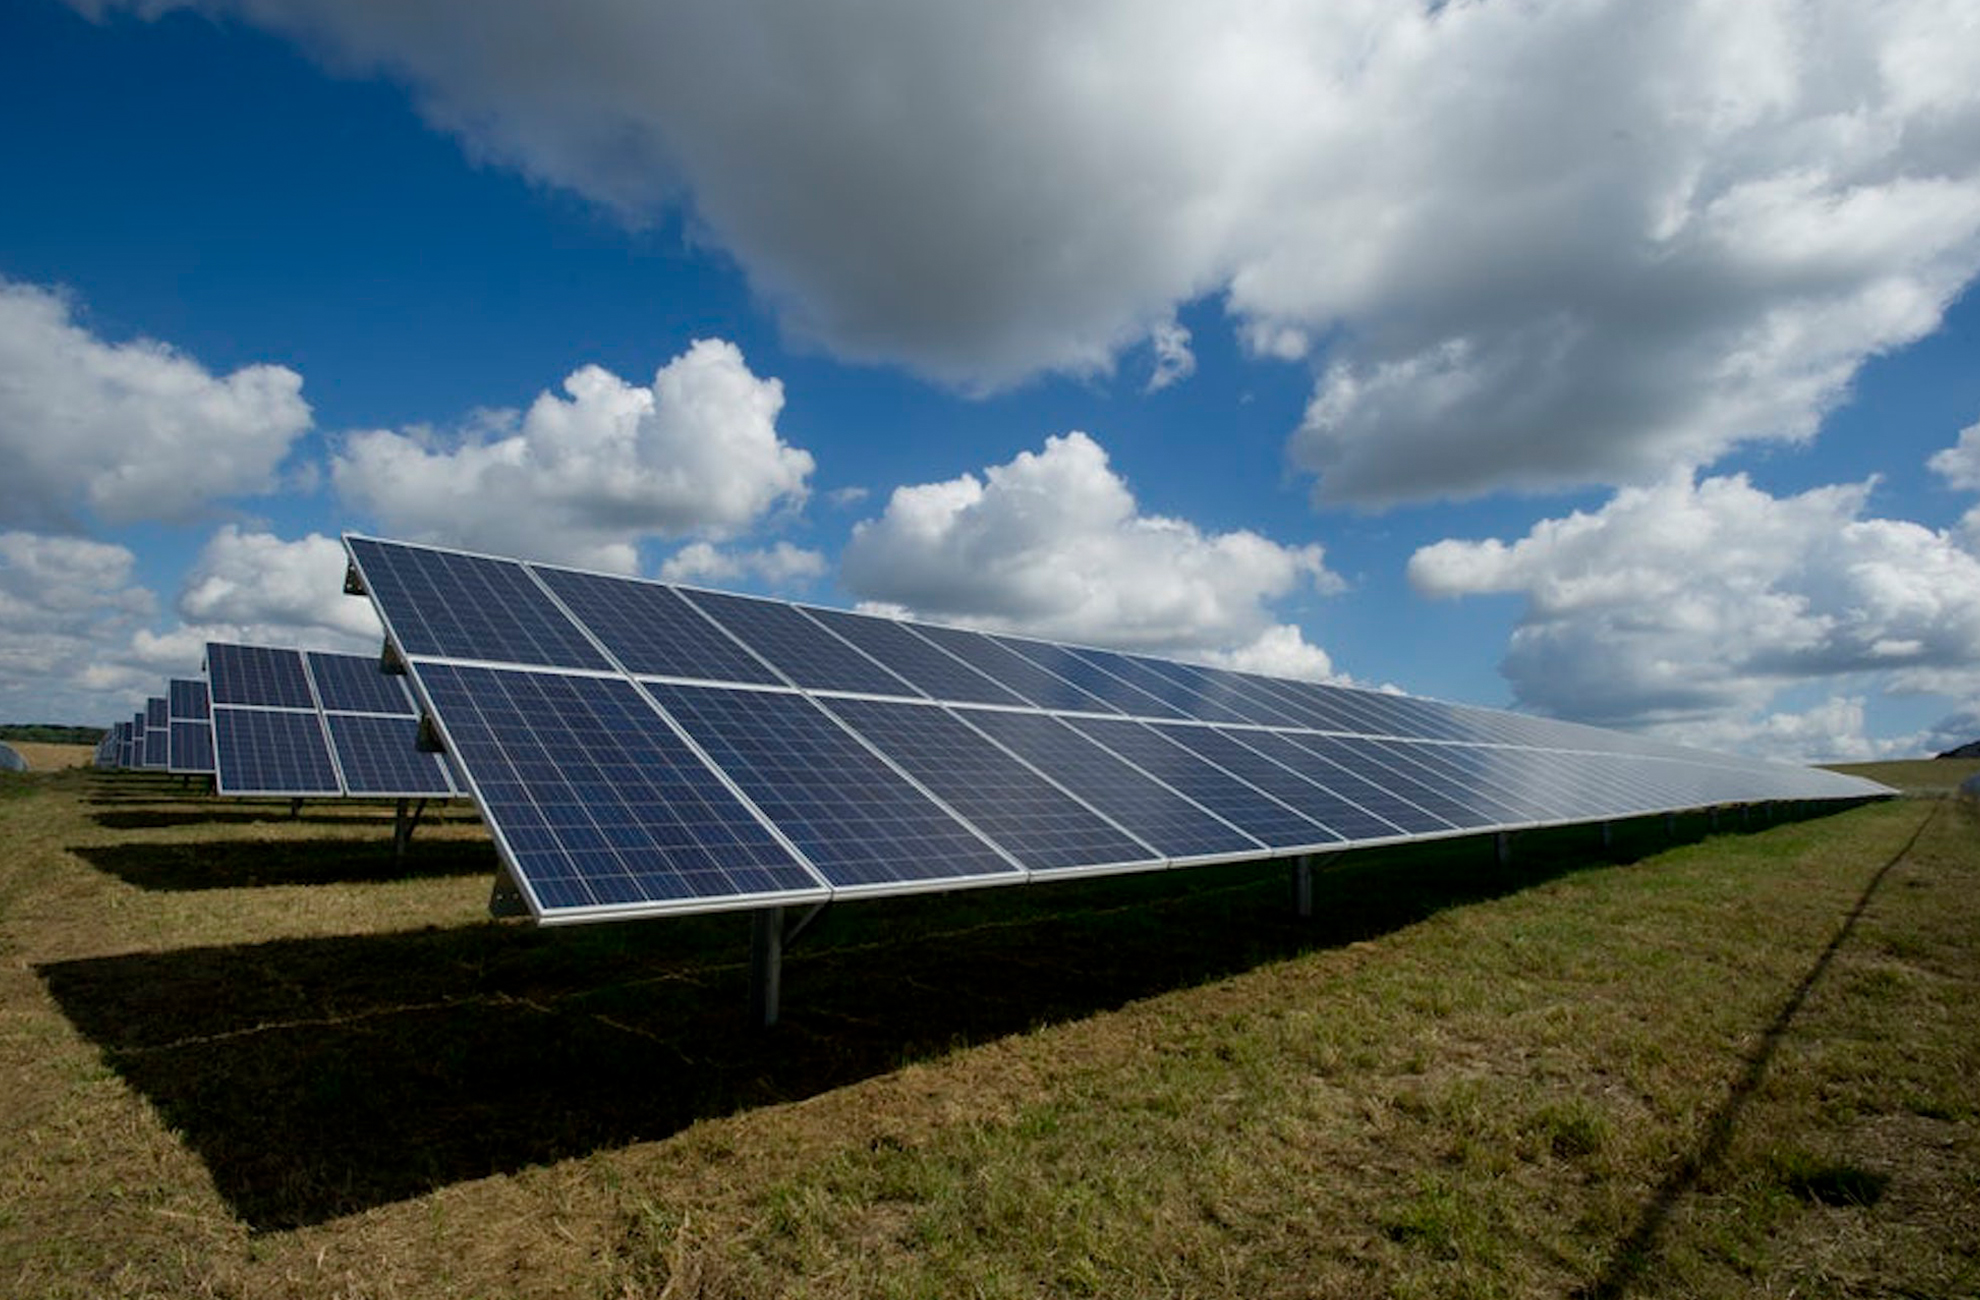 Combermere Abbey was the first estate to install a solar park